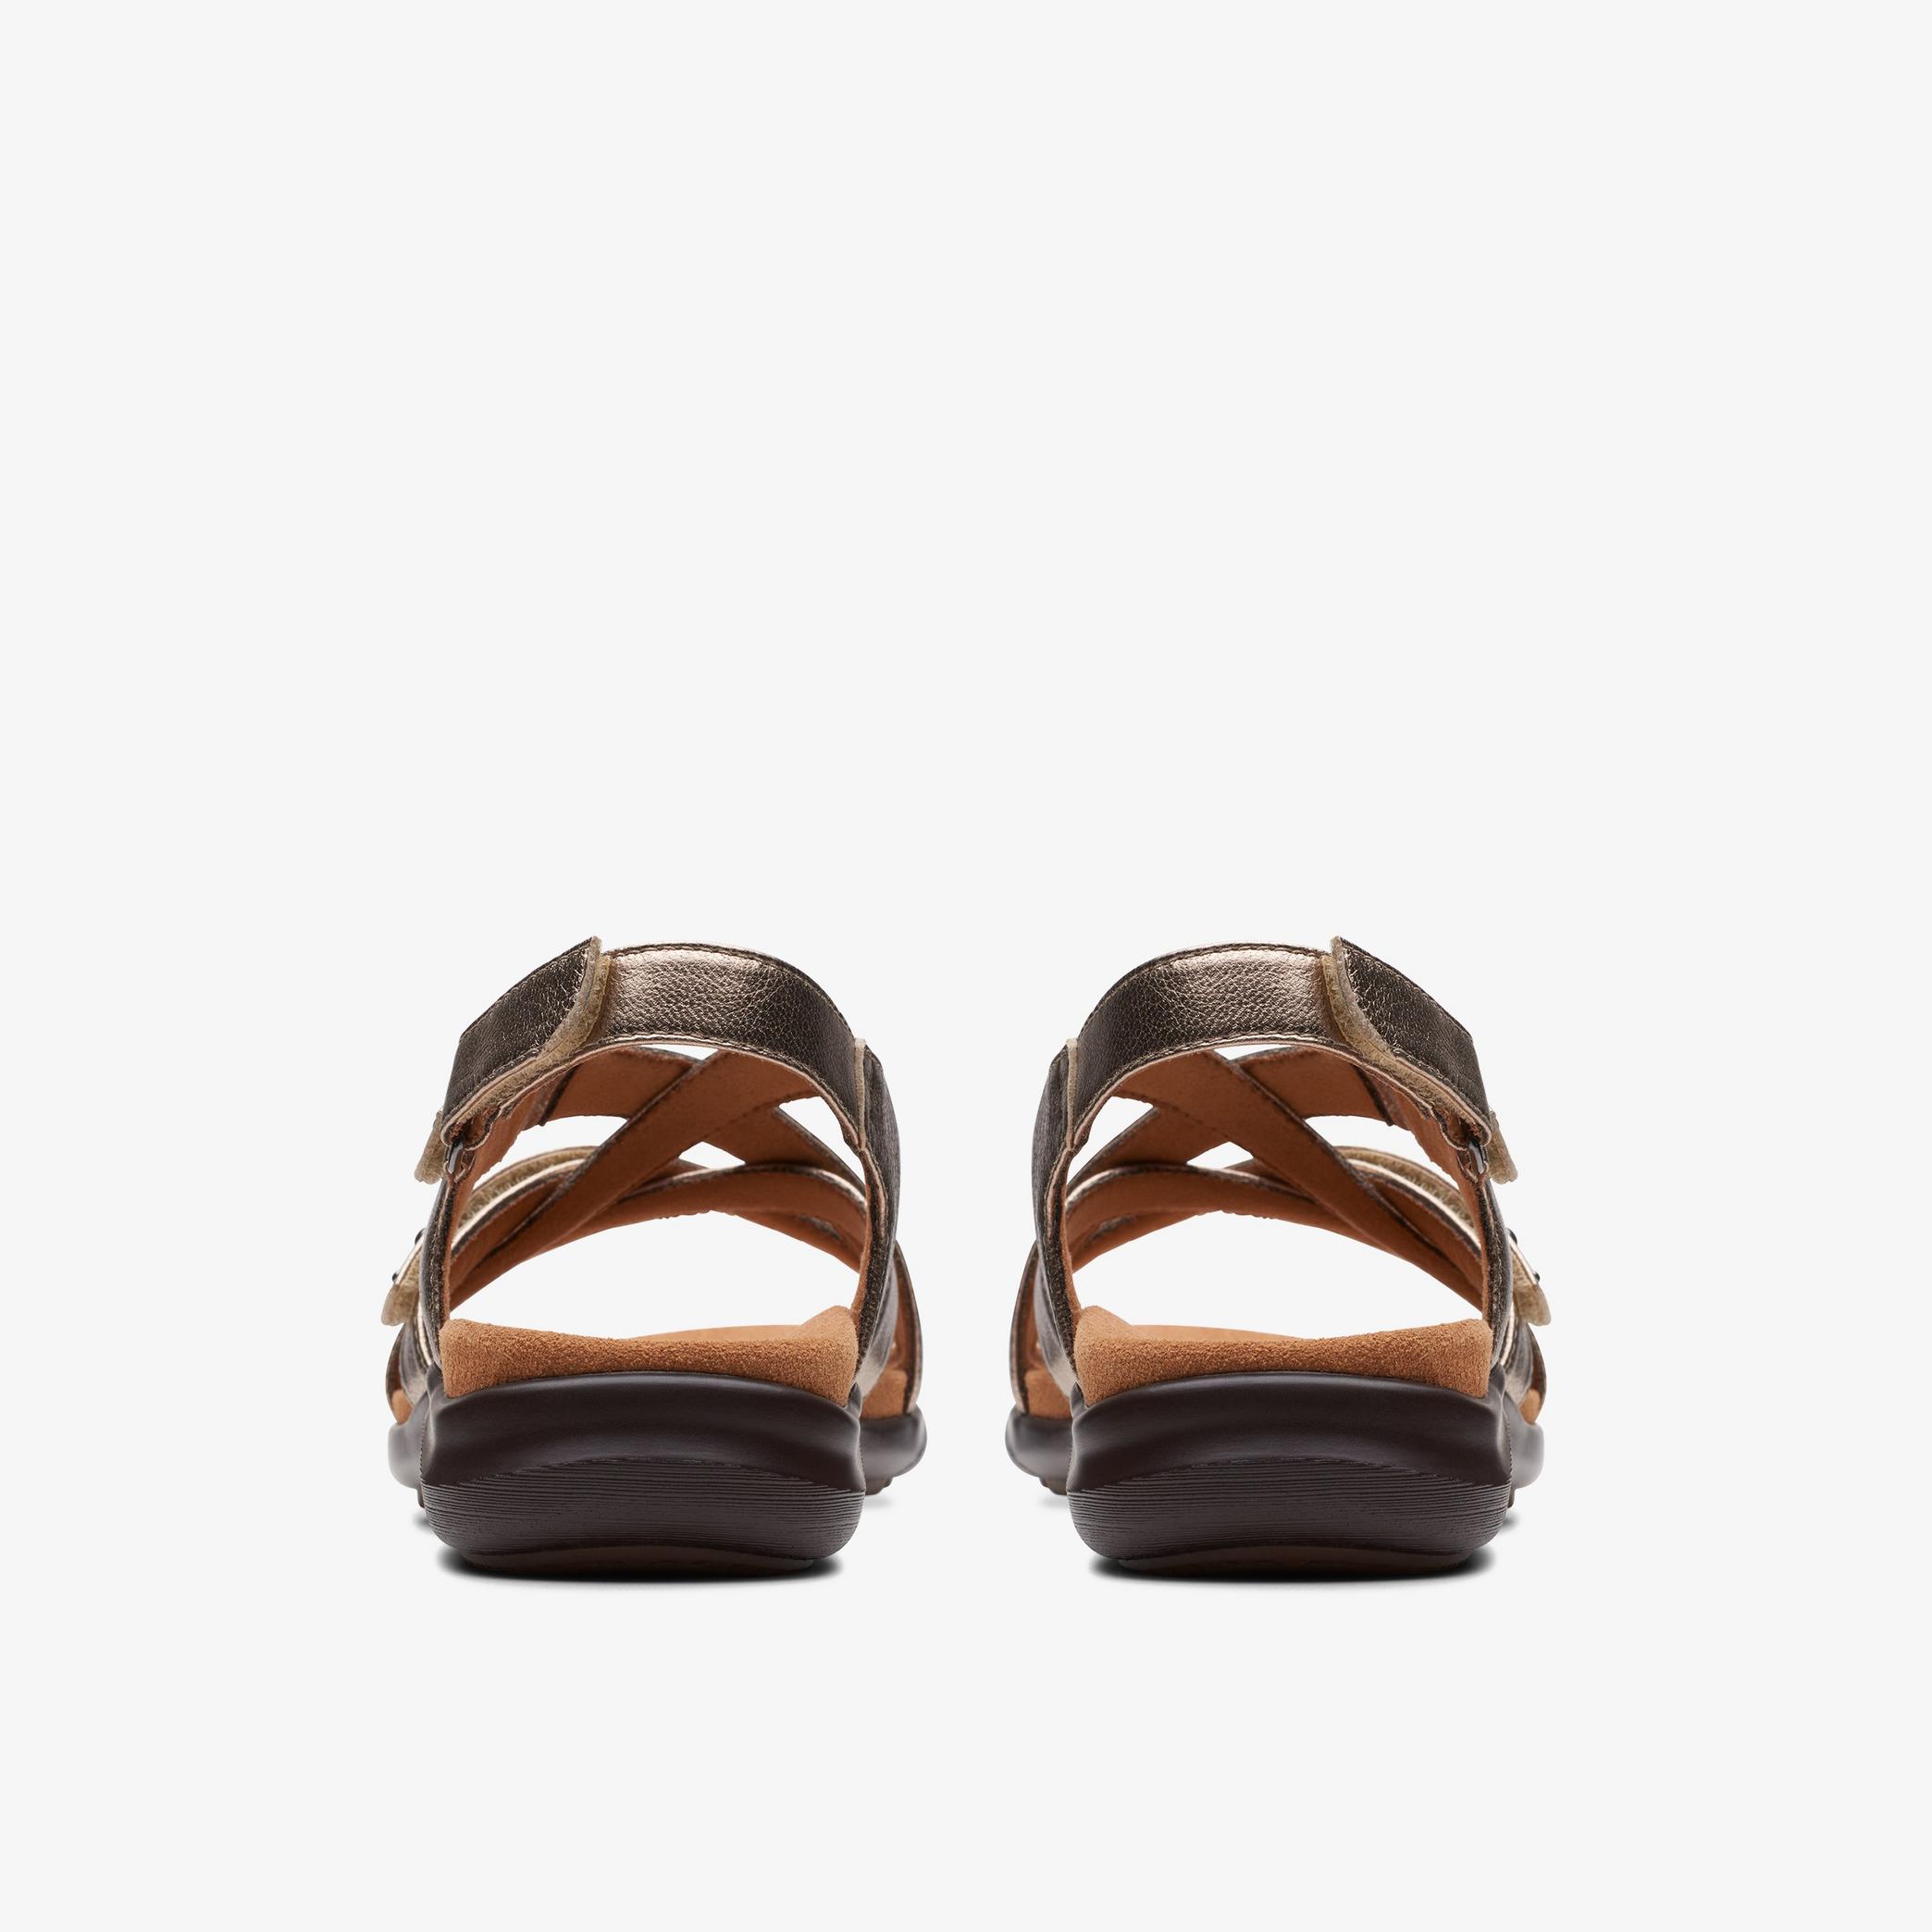 Kitly Go Metallic Flat Sandals, view 5 of 6